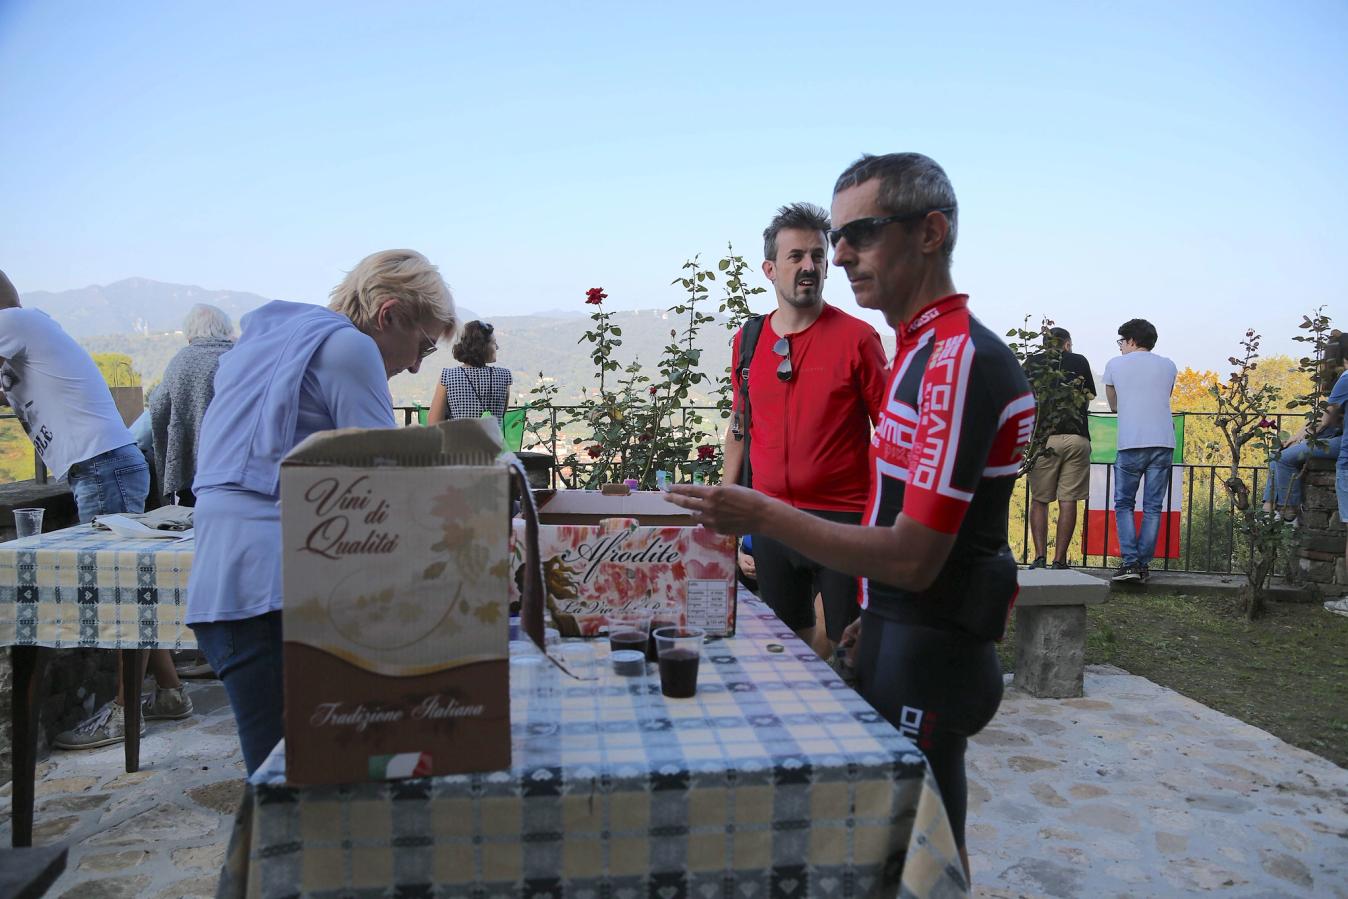 Red wine being served to supporters at the community centre overlooking La Boccola.